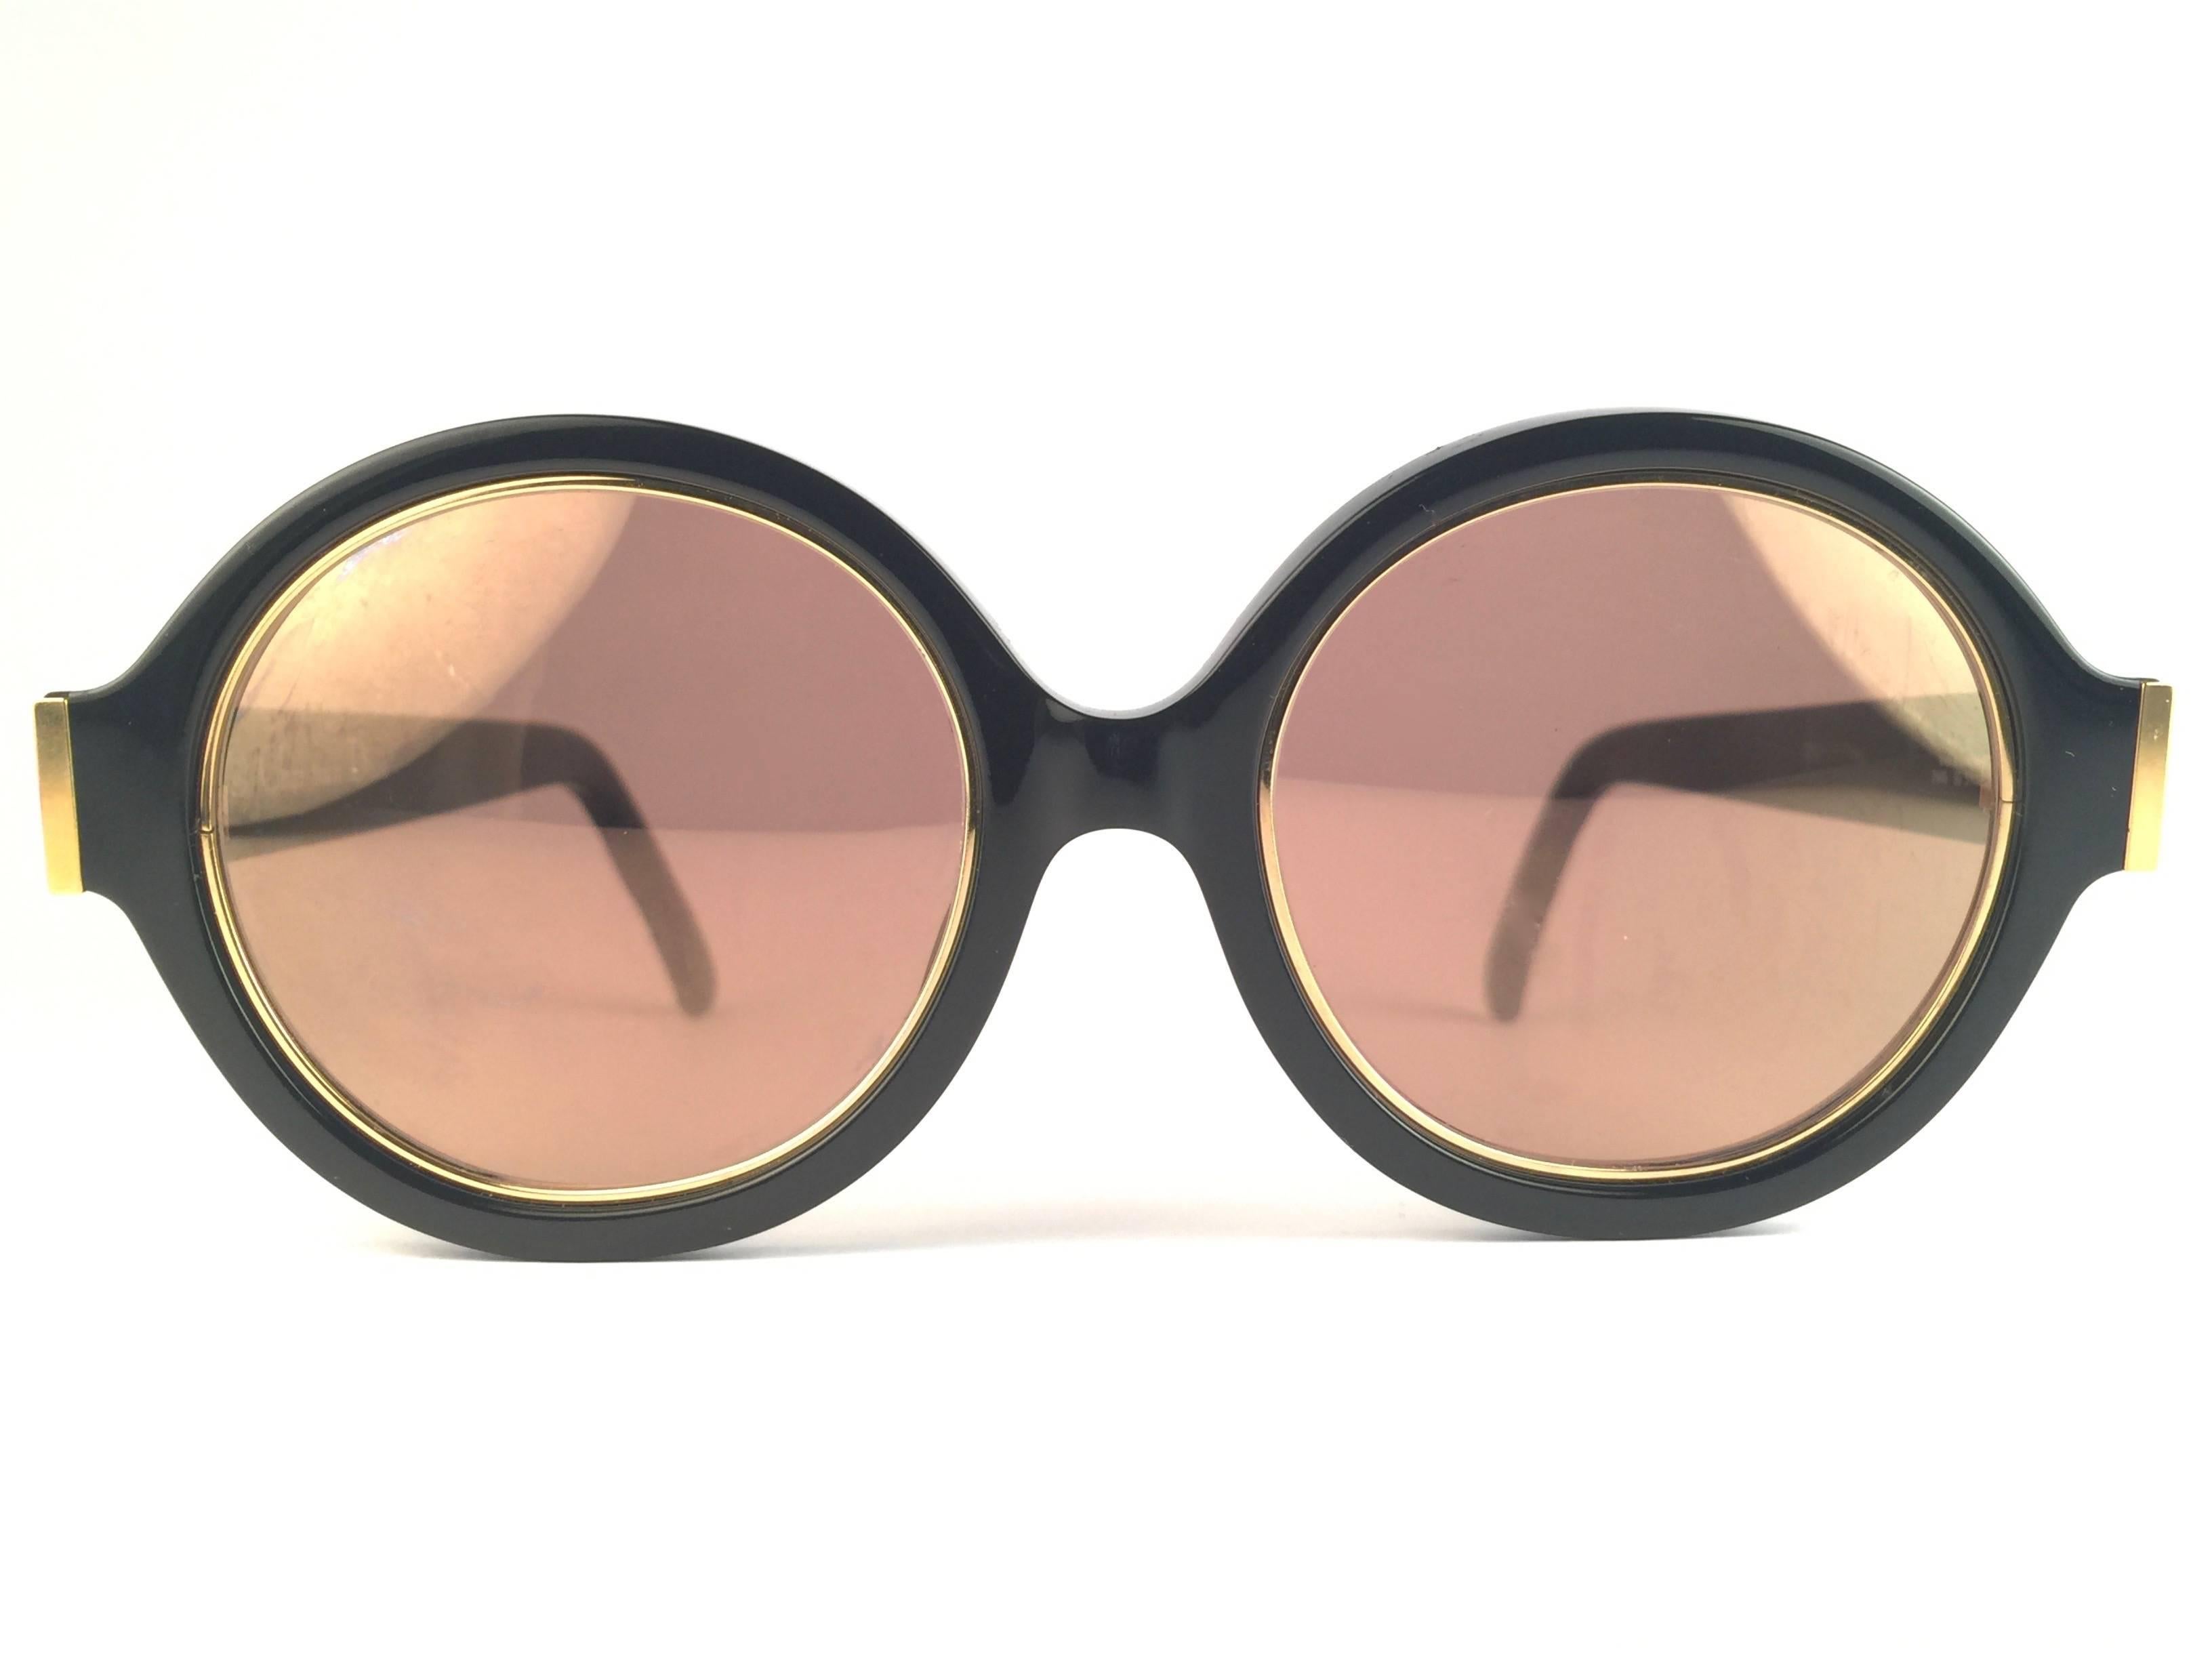 New Vintage Christian Dior 2446 90 Black round with gold inserts frame sporting spotless amber mirror lenses. 

Made in Germany.
 
Produced and design in 1970's.

A collector’s piece!

New, never worn or displayed. Comes with its original silver